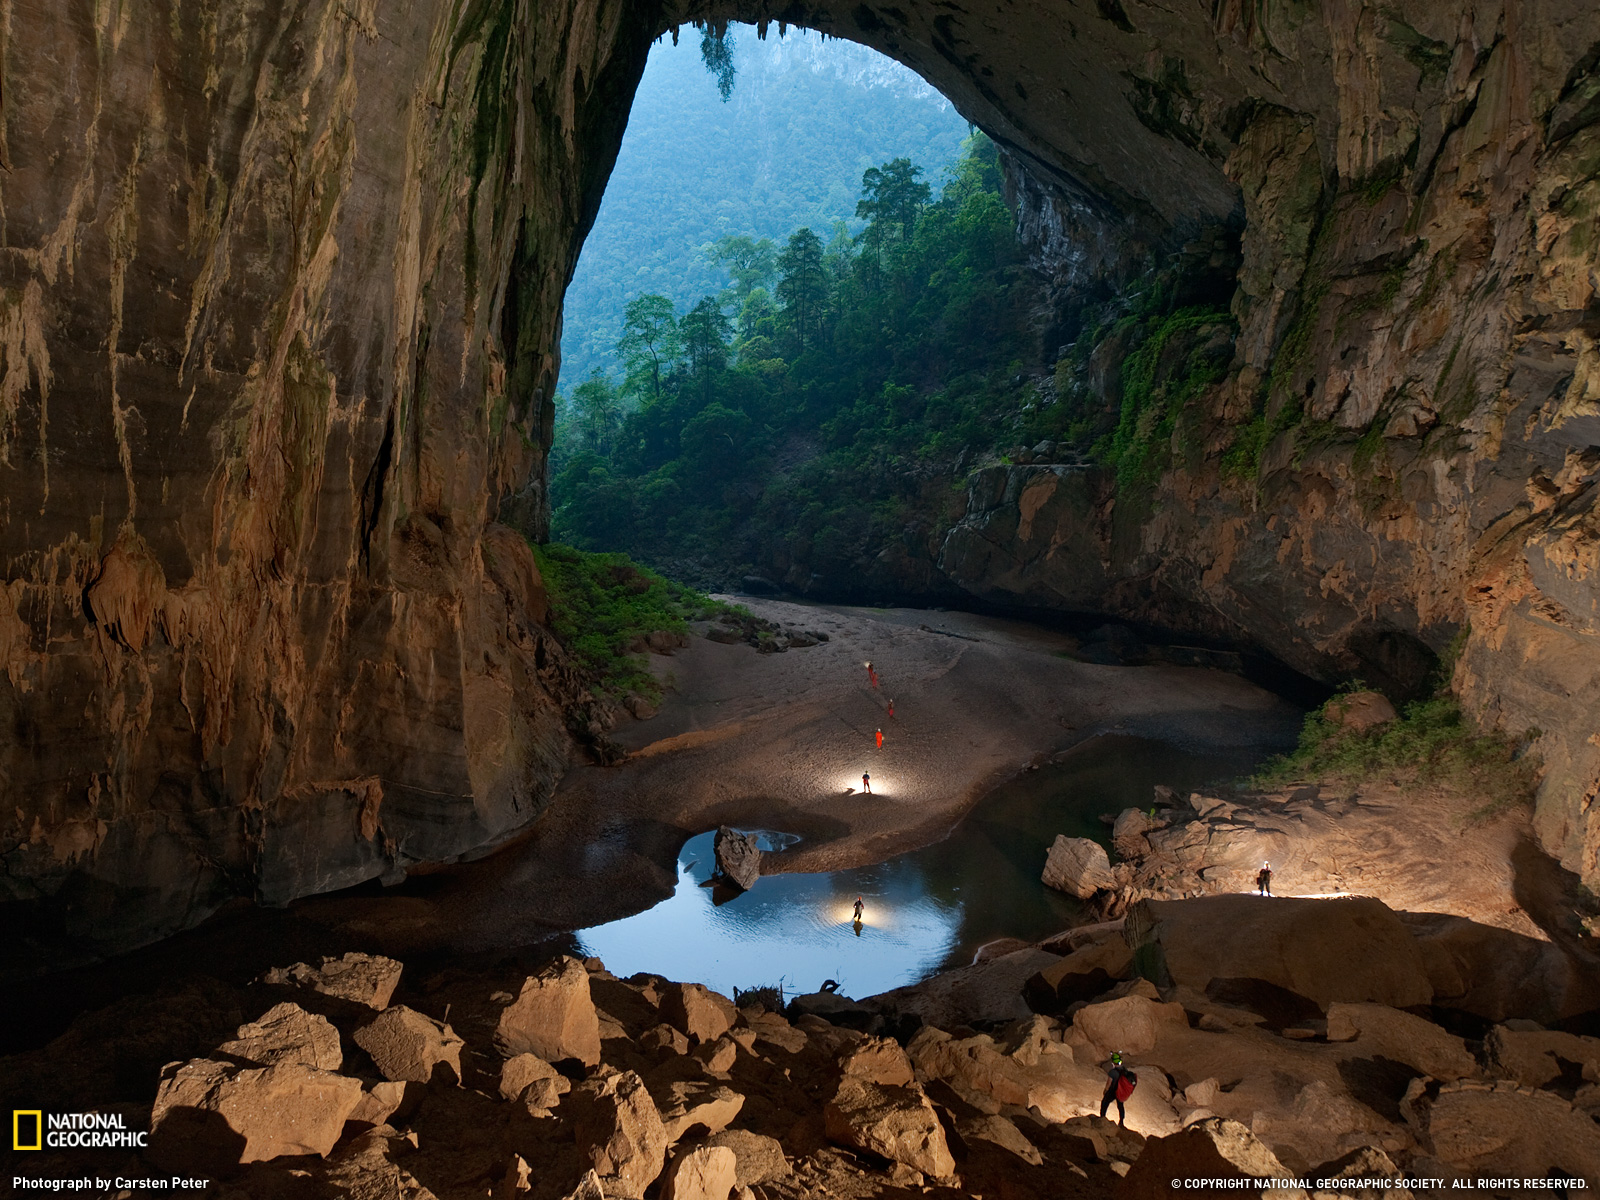 Photo Vietnam Wallpaper National Geographic Of The Day